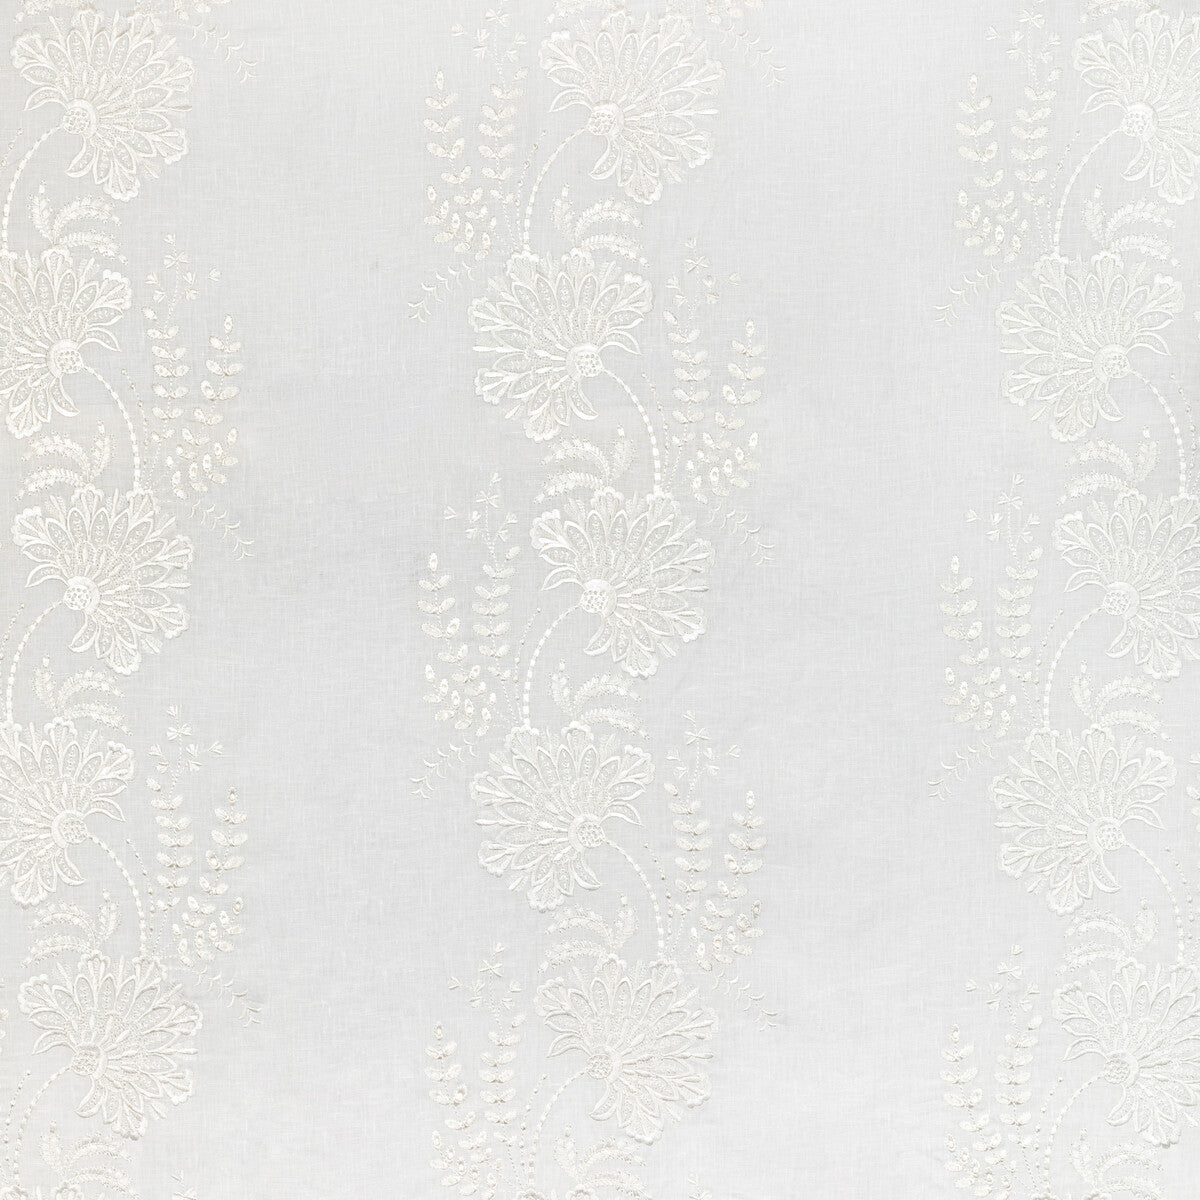 Valencia Sheer fabric in ivory color - pattern 2021122.1.0 - by Lee Jofa in the Summerland collection